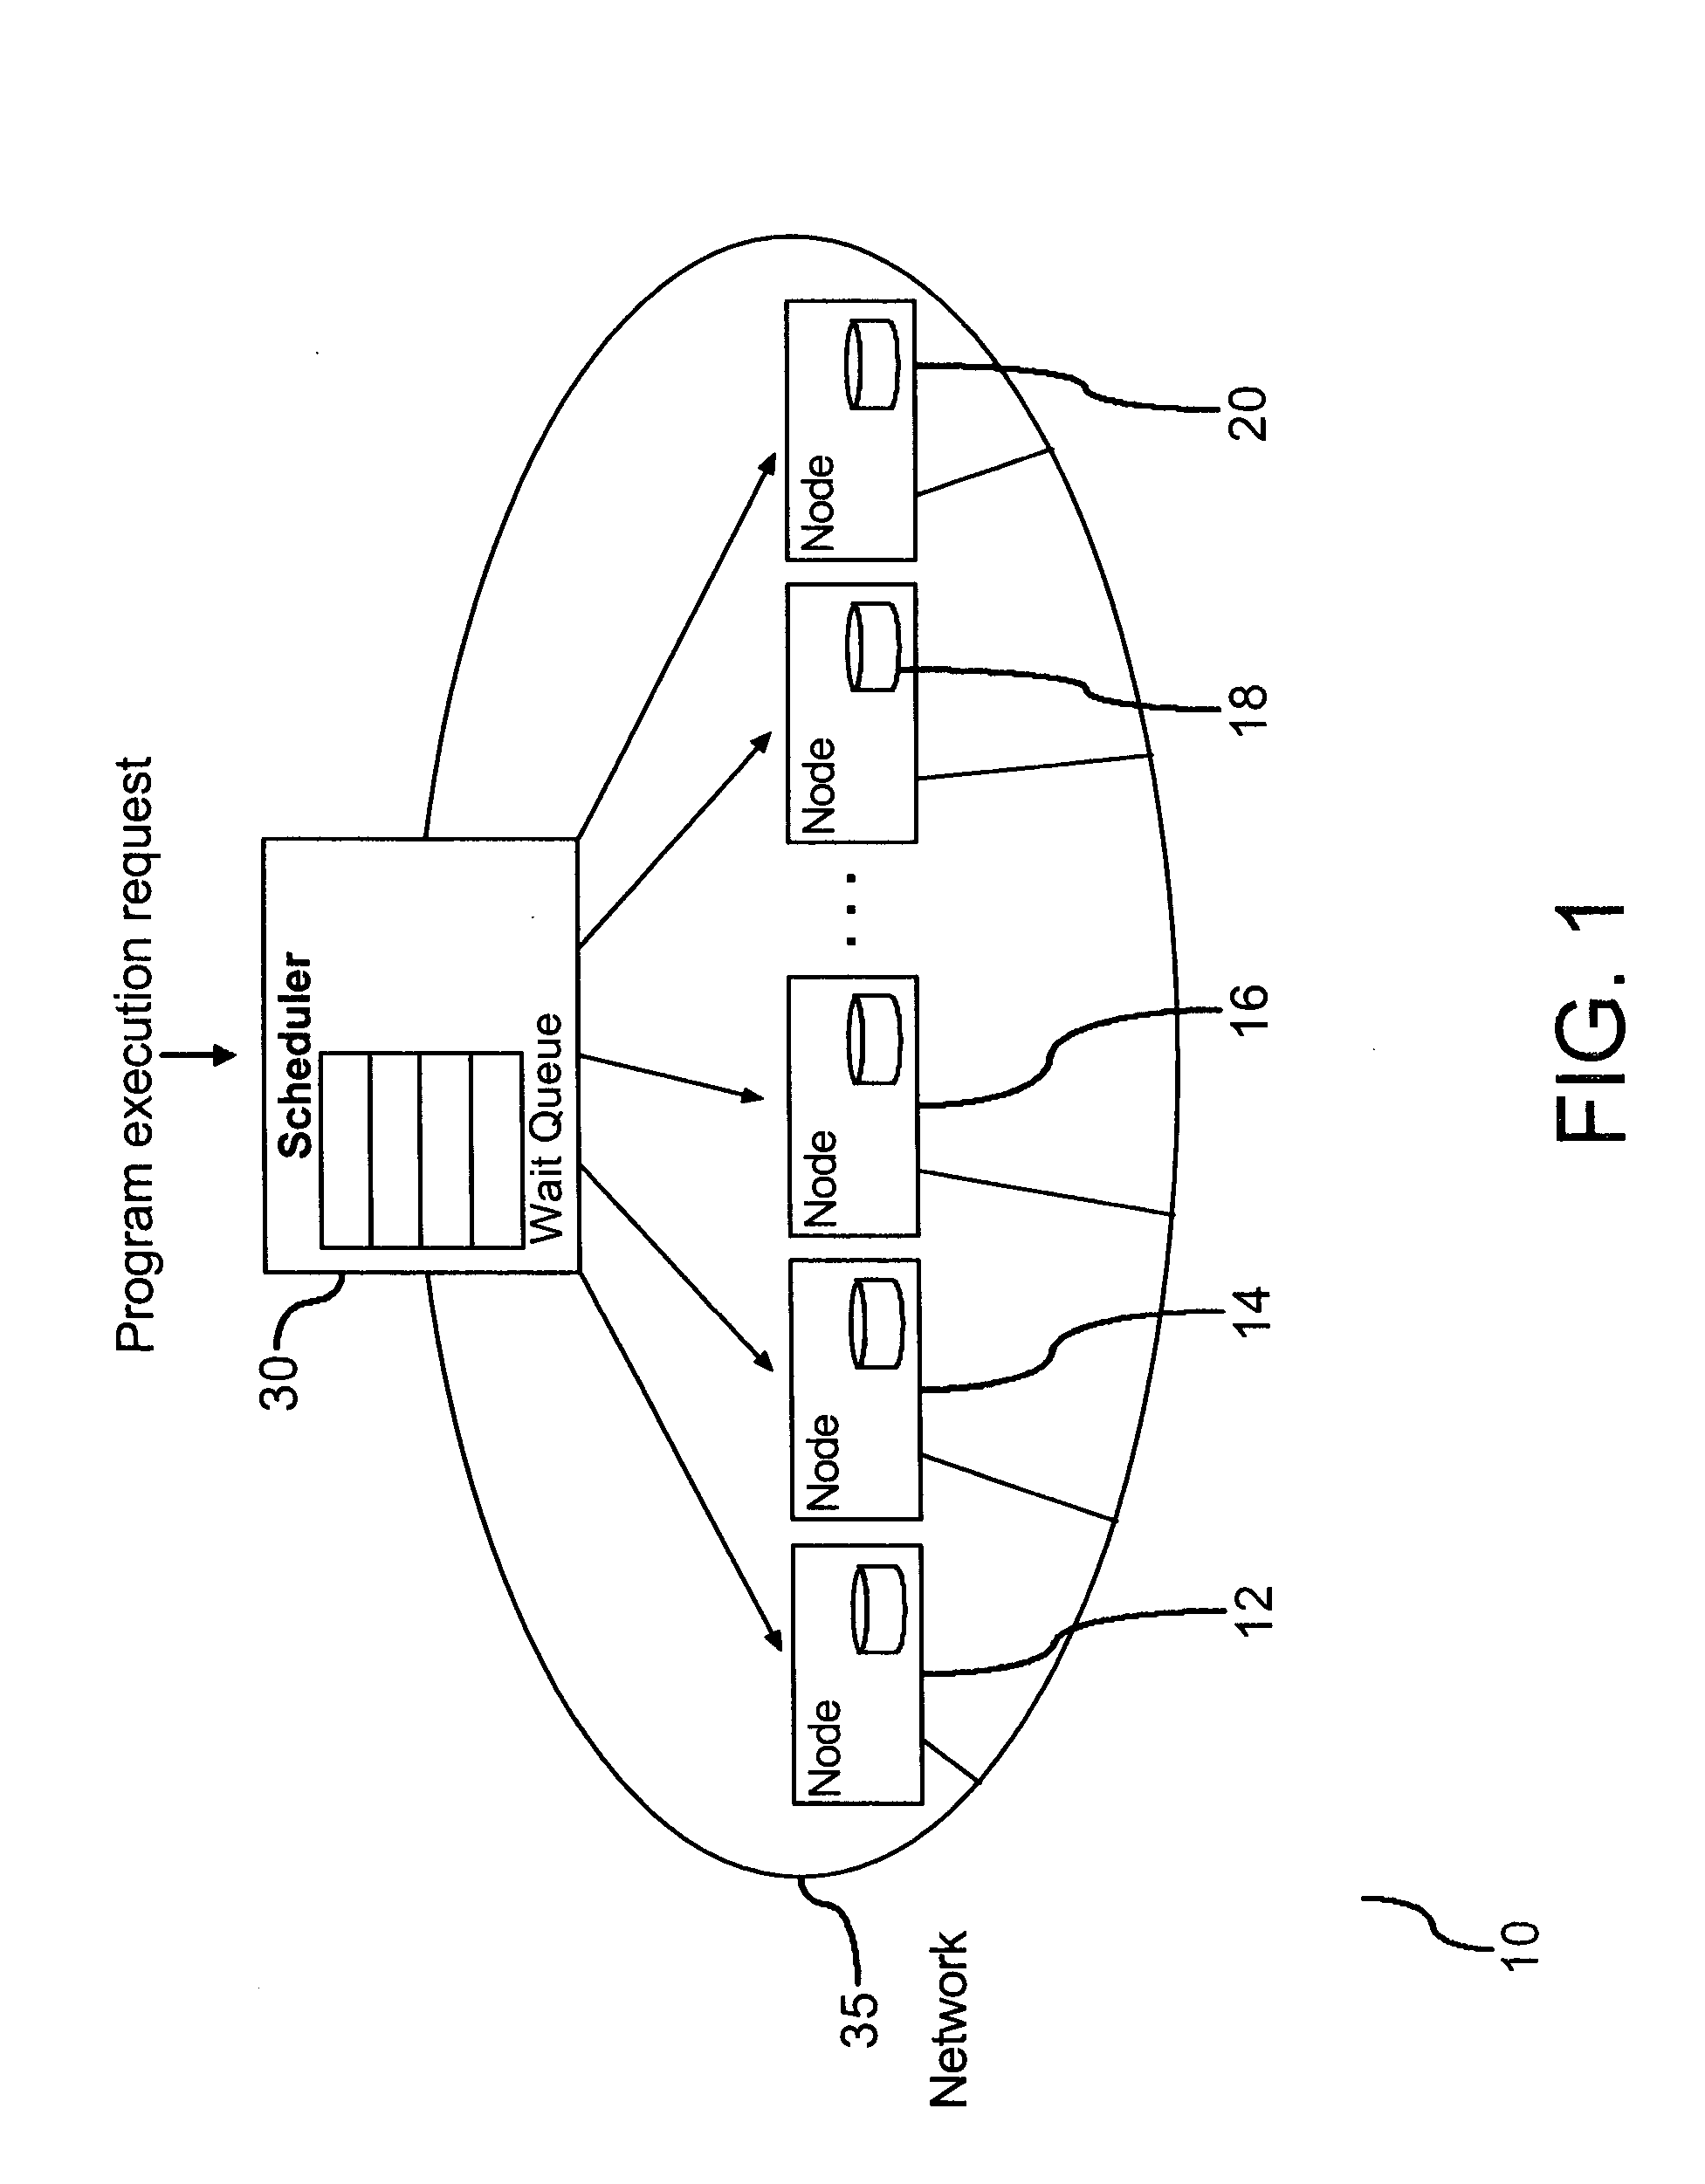 Method for dynamic scheduling in a distributed environment